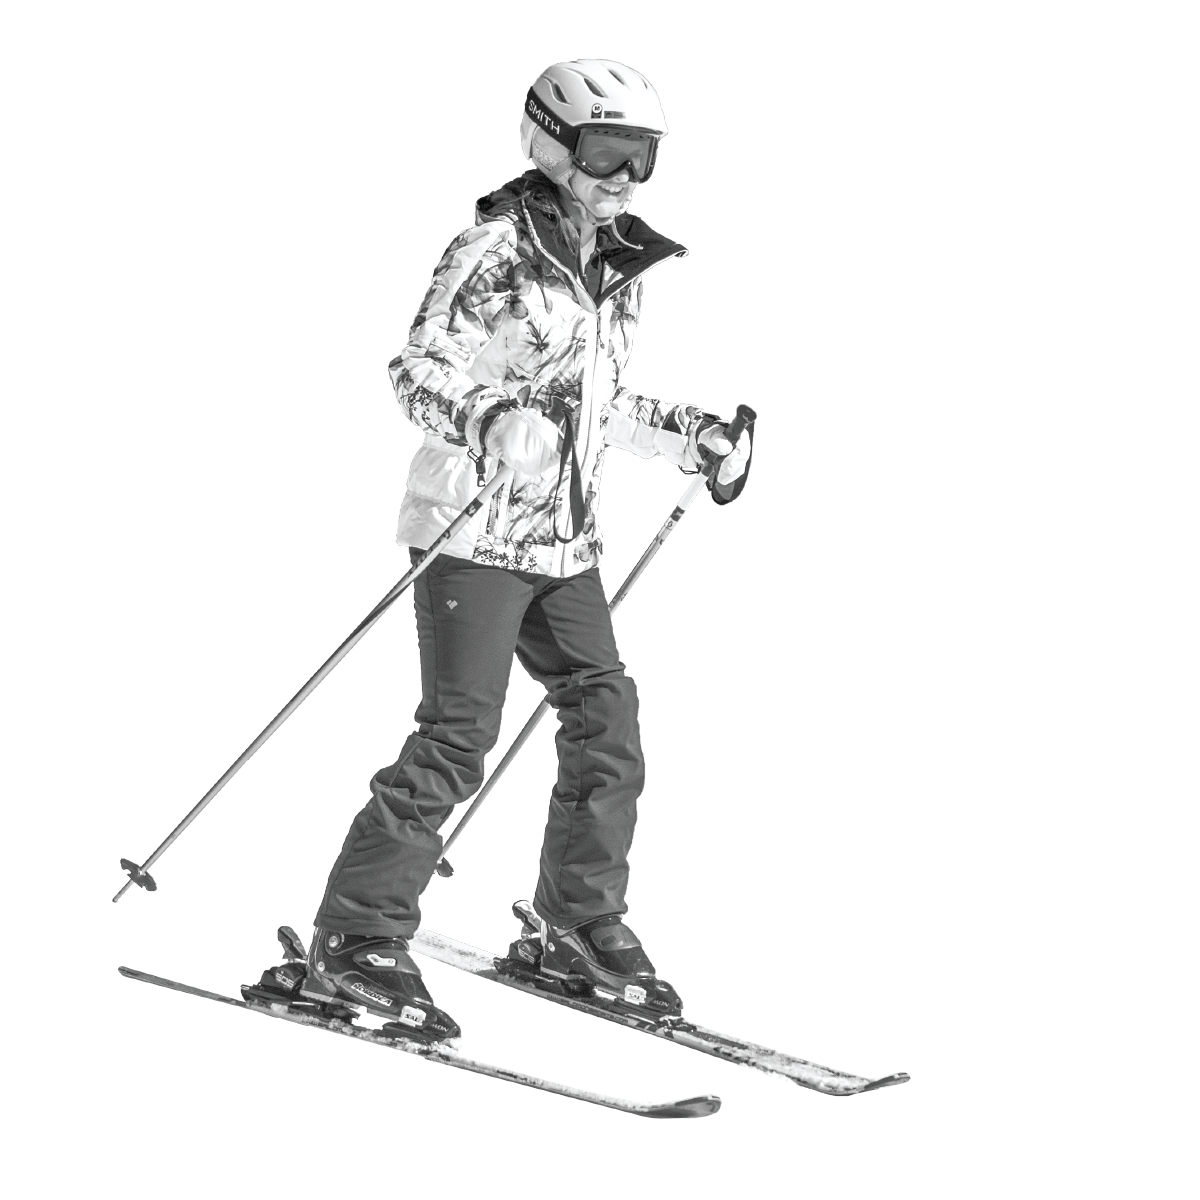 Girl snow skiing in black and white